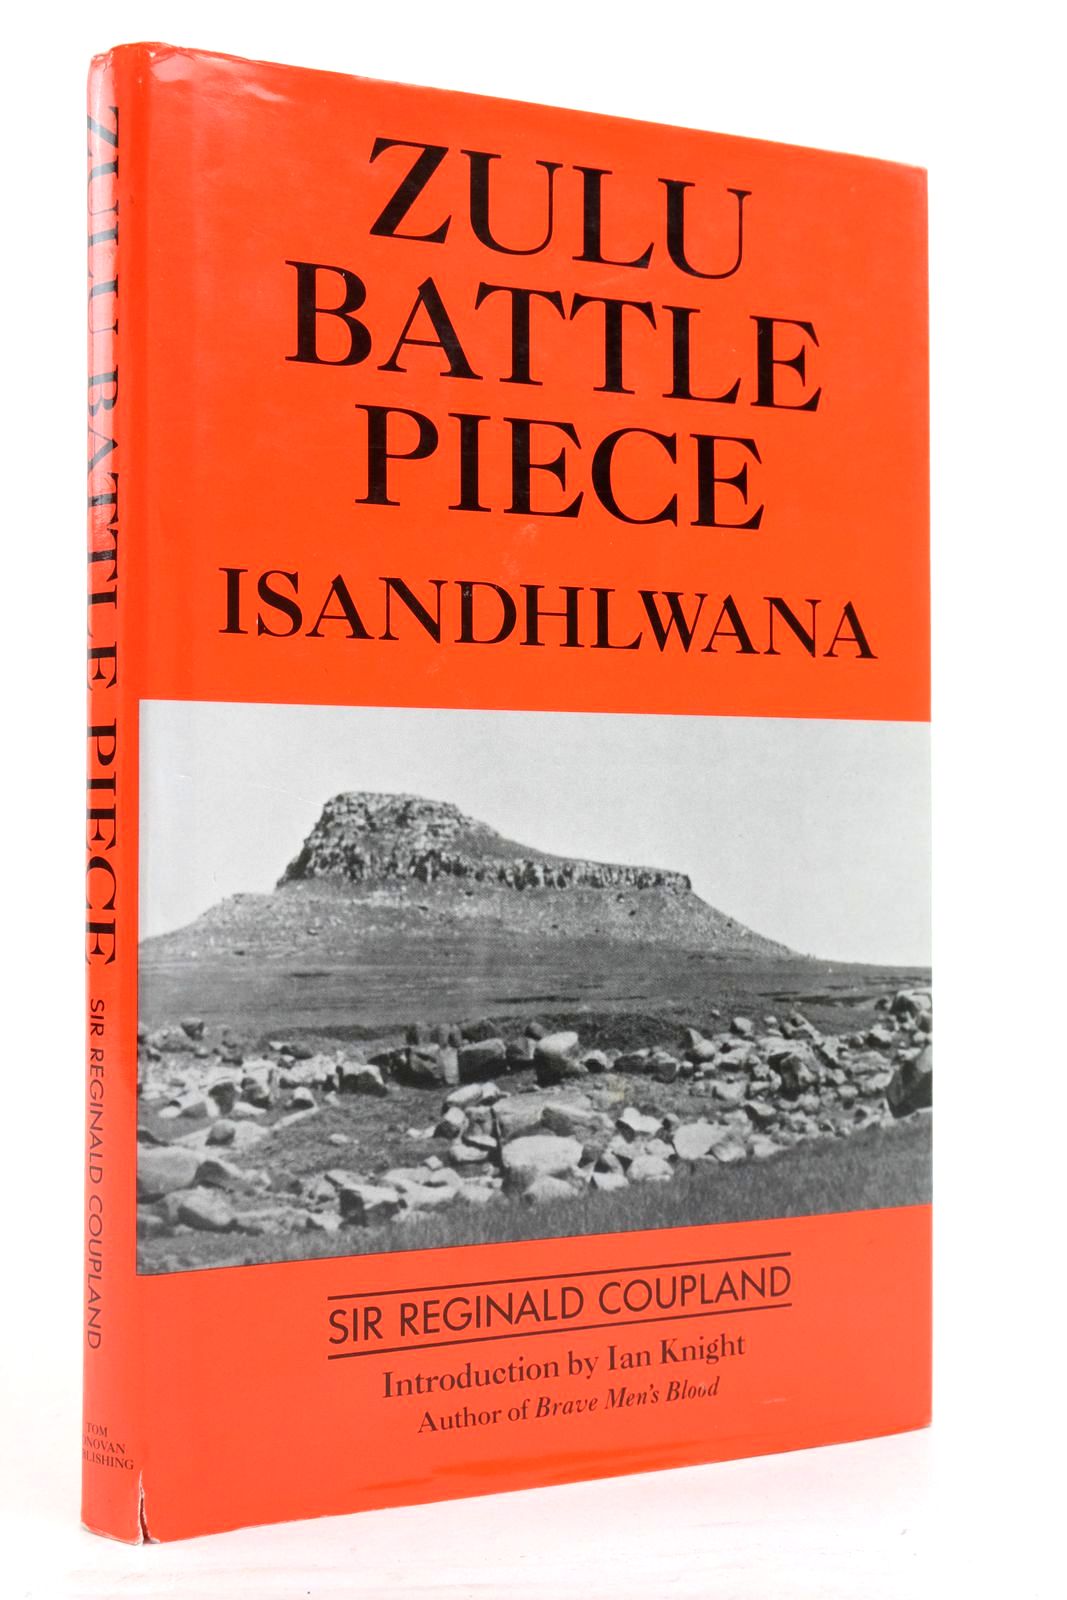 Photo of ZULU BATTLE PIECE ISANDHLWANA written by Coupland, Reginald published by Tom Donovan (STOCK CODE: 2138047)  for sale by Stella & Rose's Books